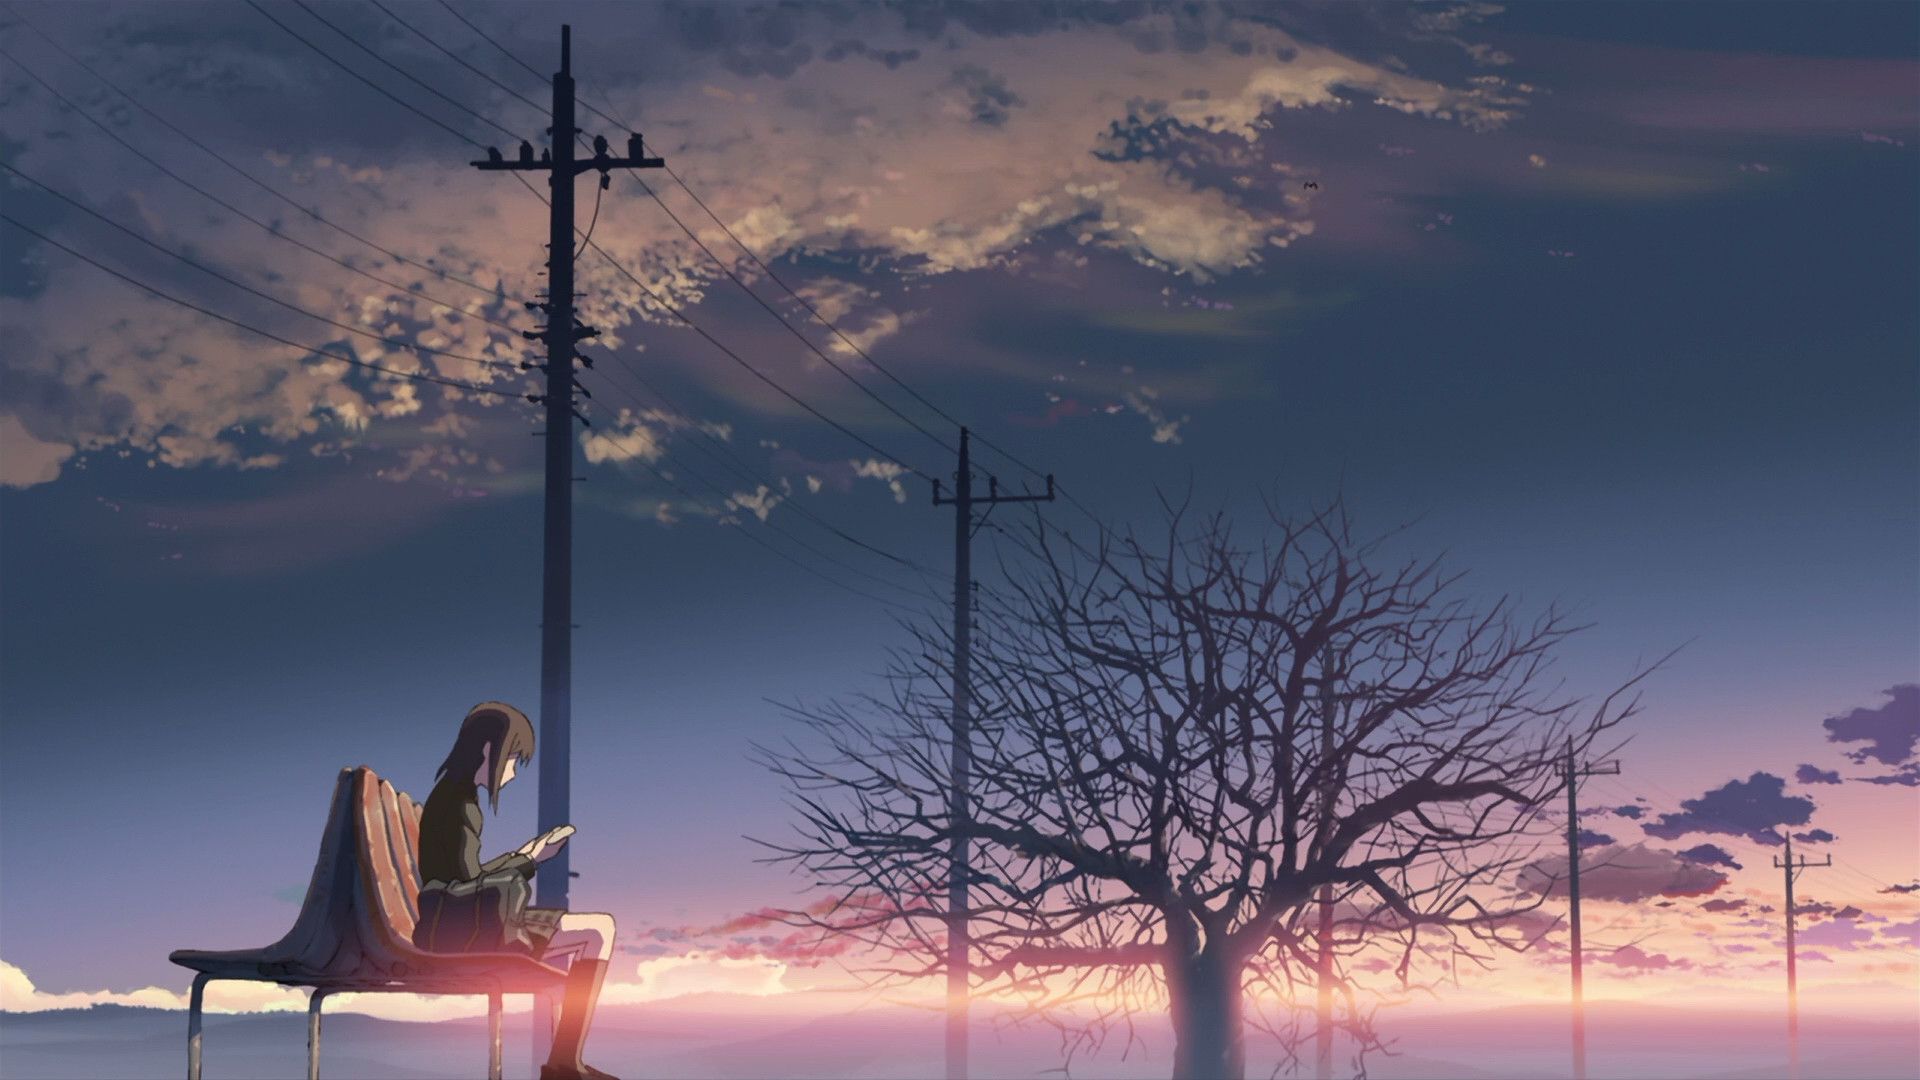 Recently watched 5 Centimeter (5 Centimeters per Second)